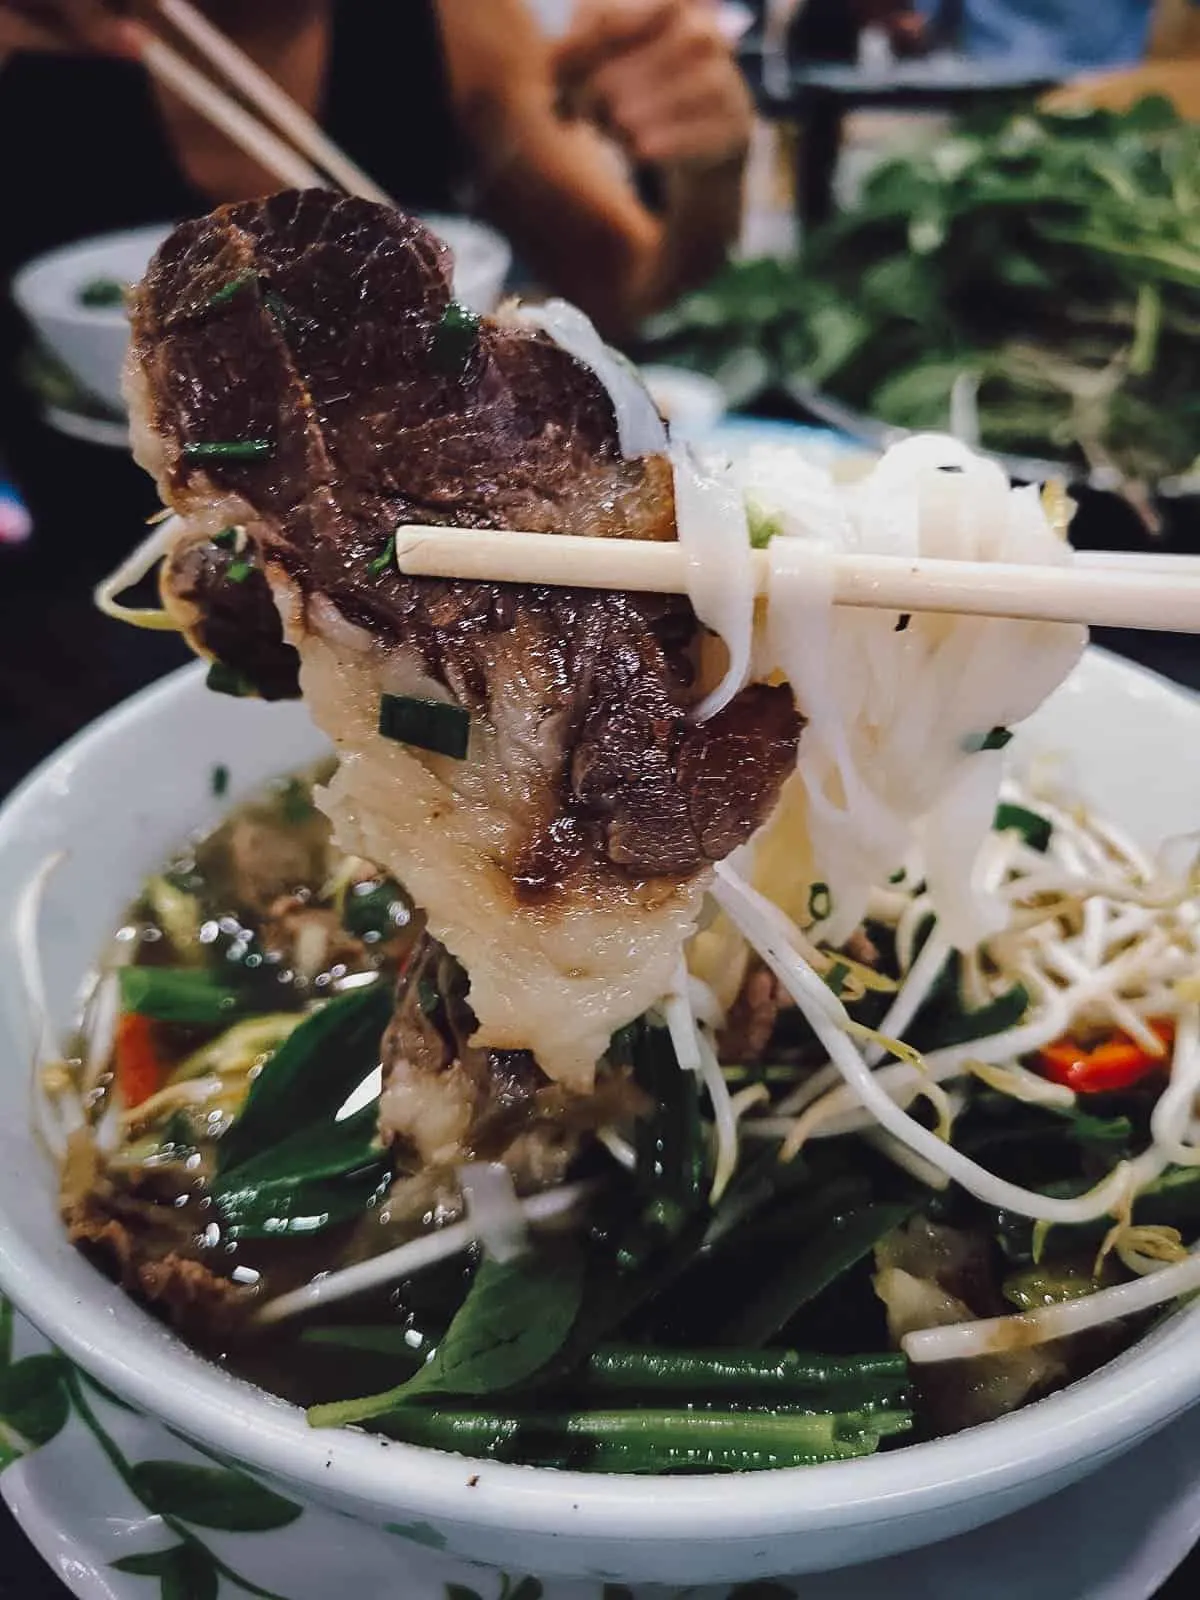 Slice of beef inside pho at Pho Le restaurant in Saigon